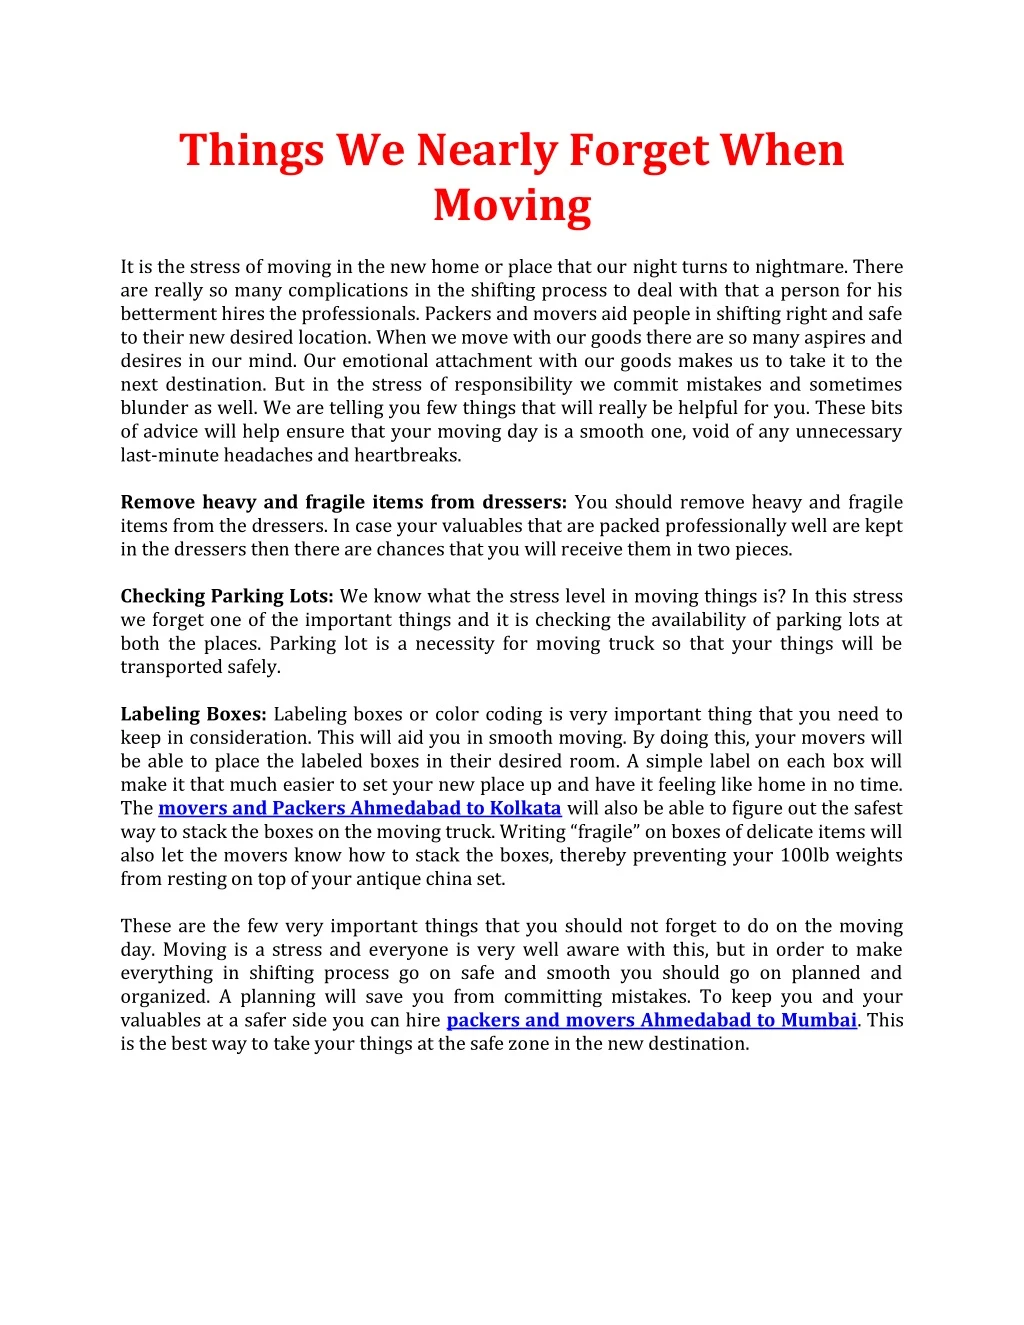 things we nearly forget when moving